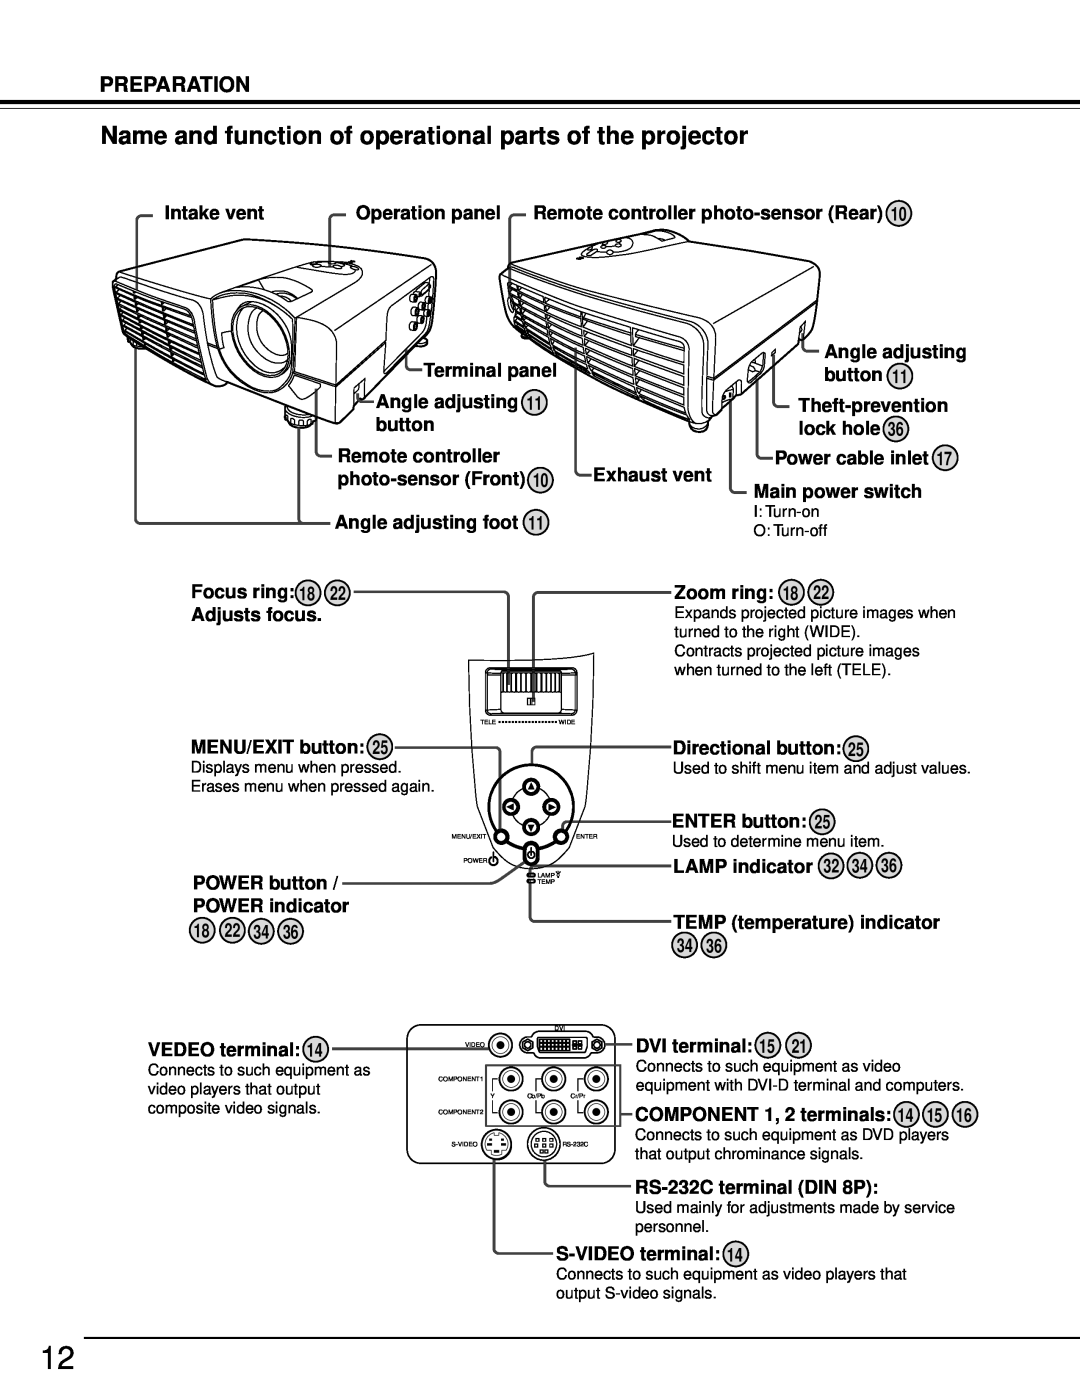 Toshiba TDP-MT500 owner manual Name and function of operational parts of the projector, Preparation 